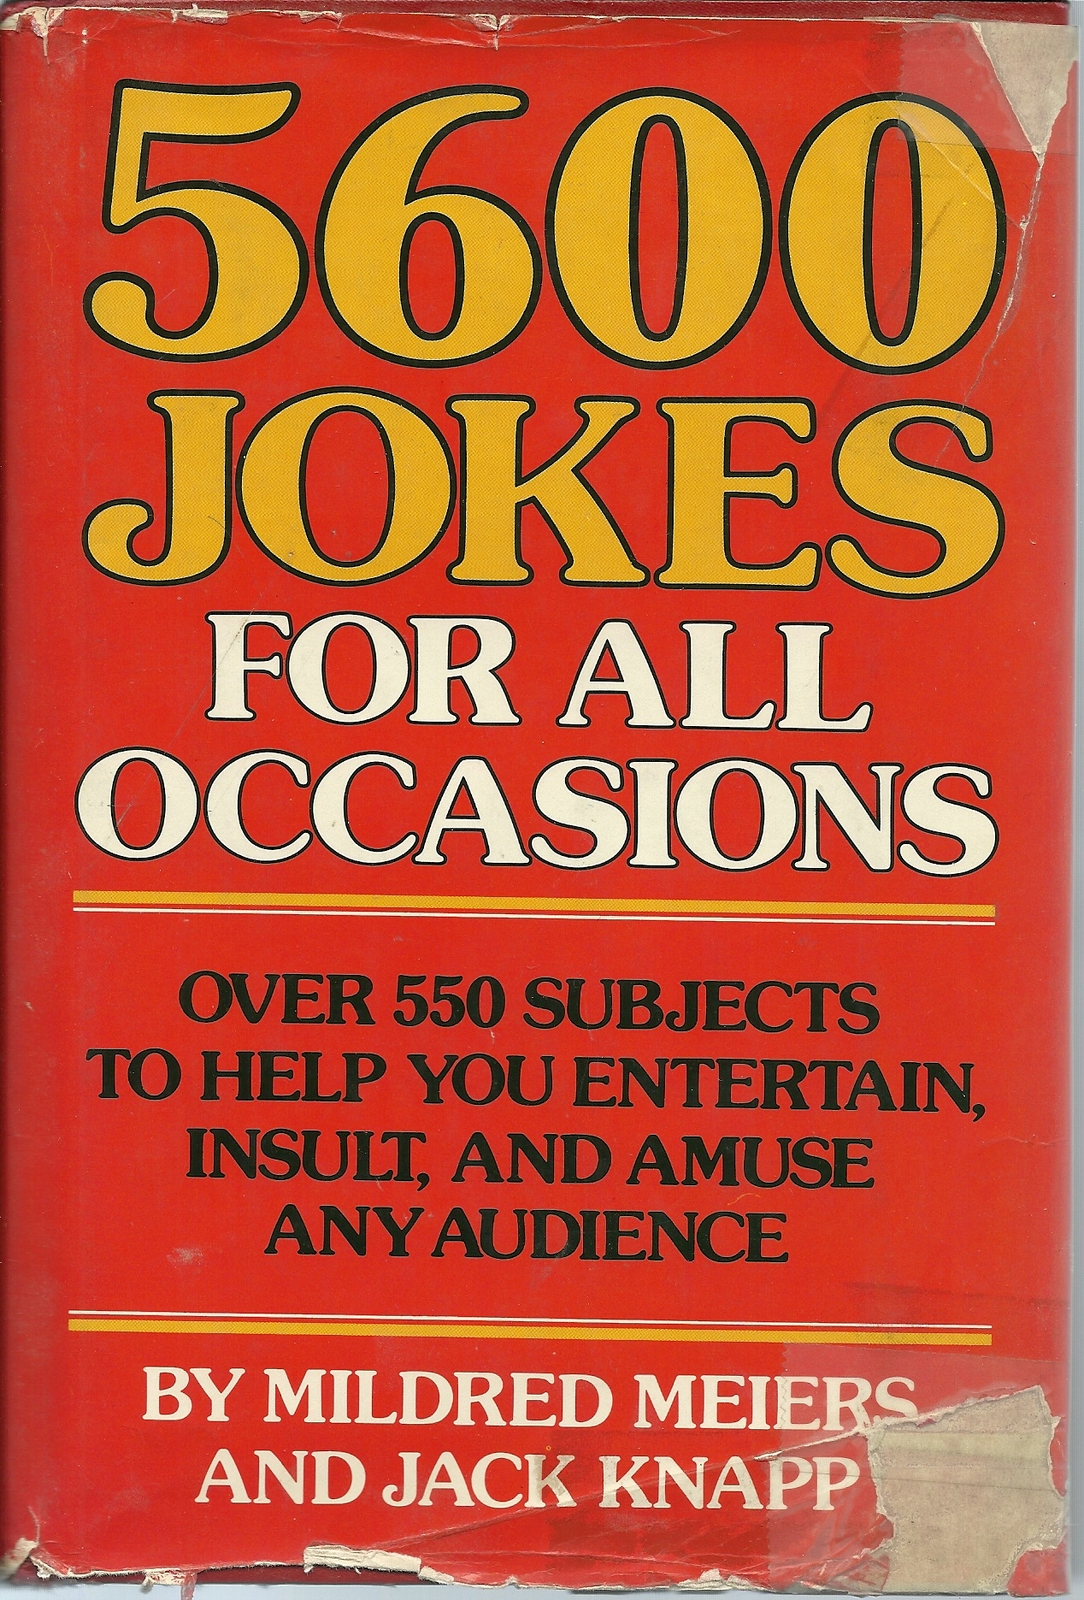 Primary image for 5600 Jokes For All Occasions by Mildred Meiers and Jack Knapp Hardcover Book